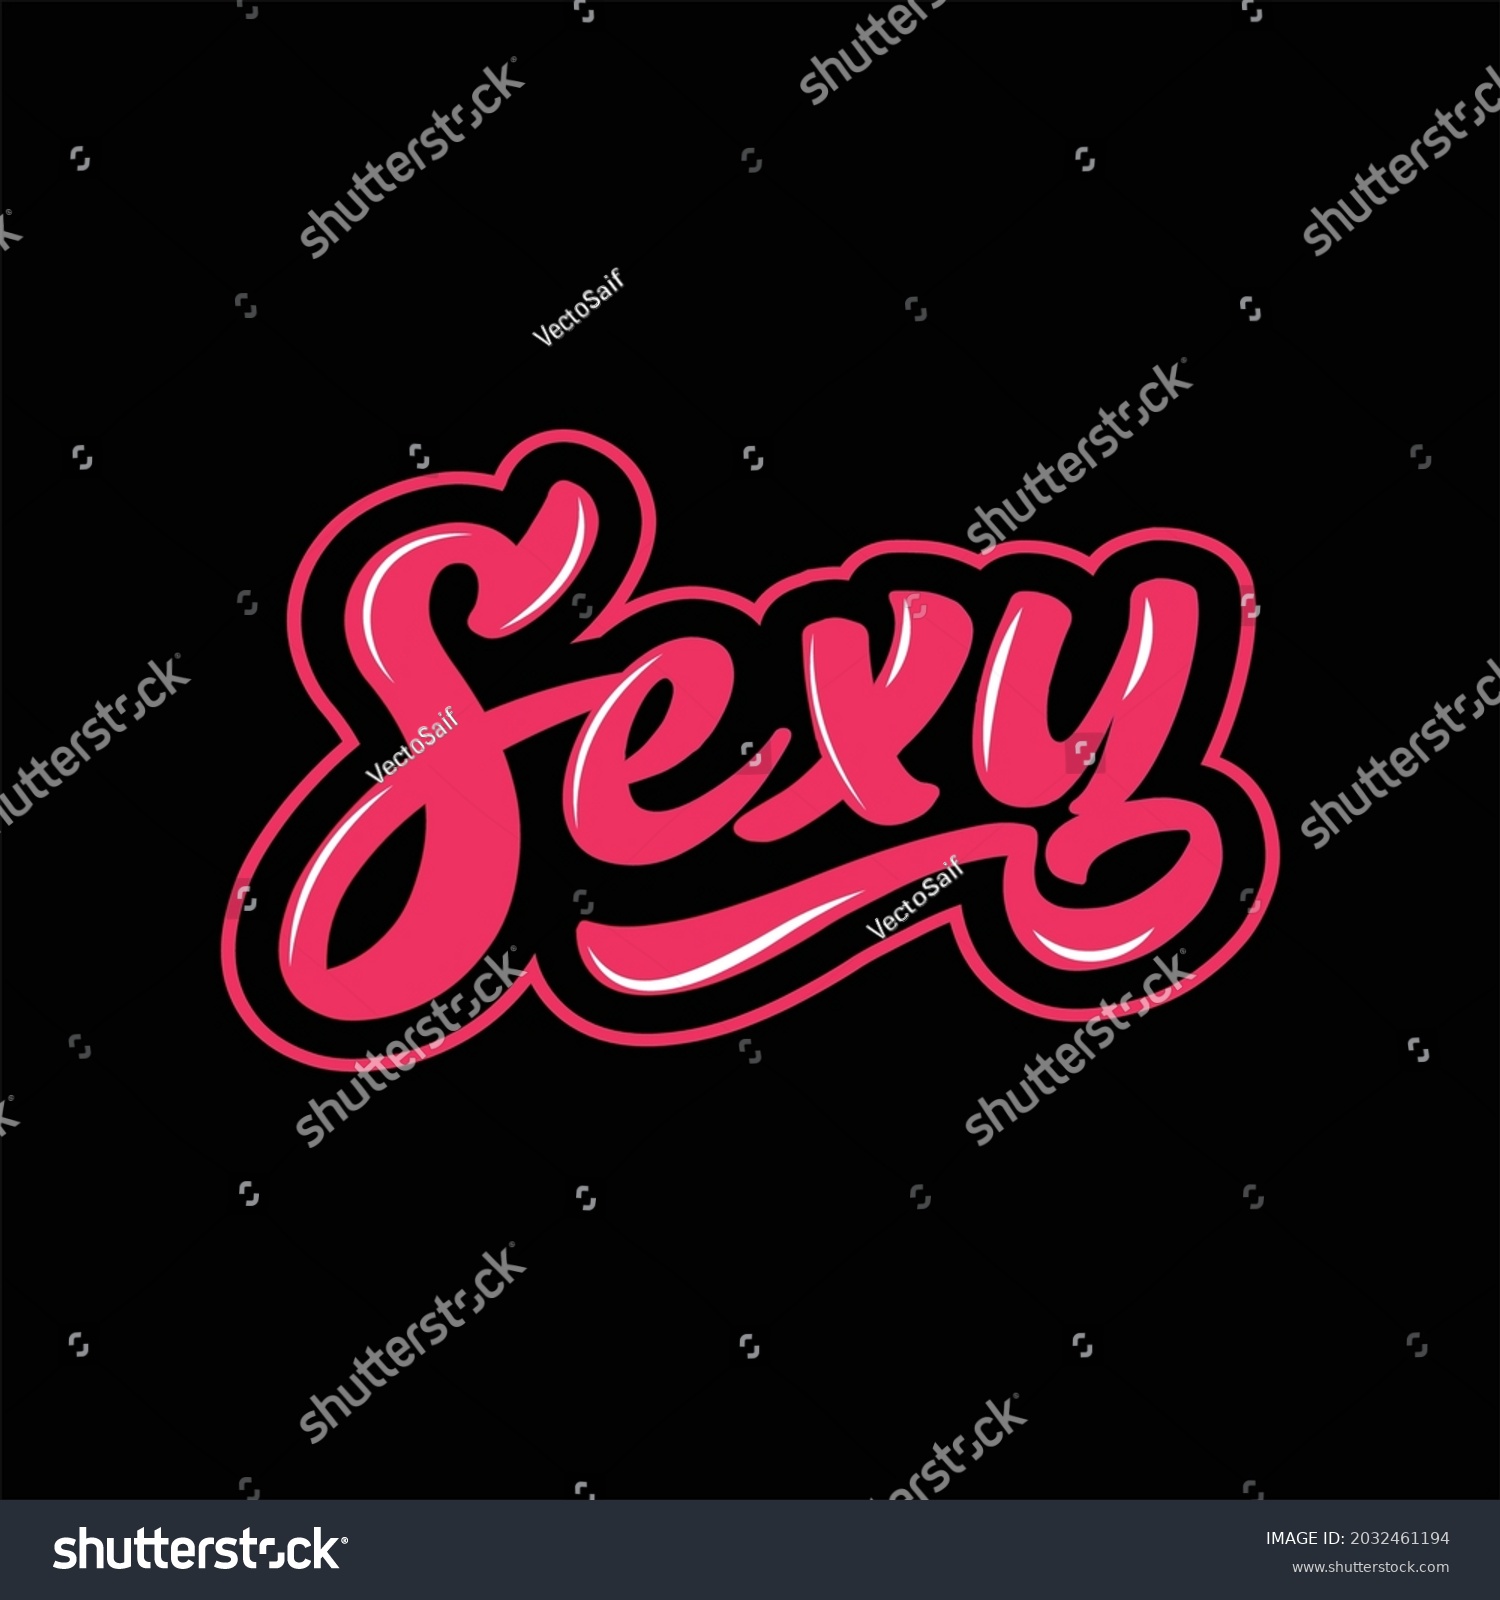 Sexy Word Typography Design Vector Stock Vector Royalty Free 2032461194 Shutterstock 3538